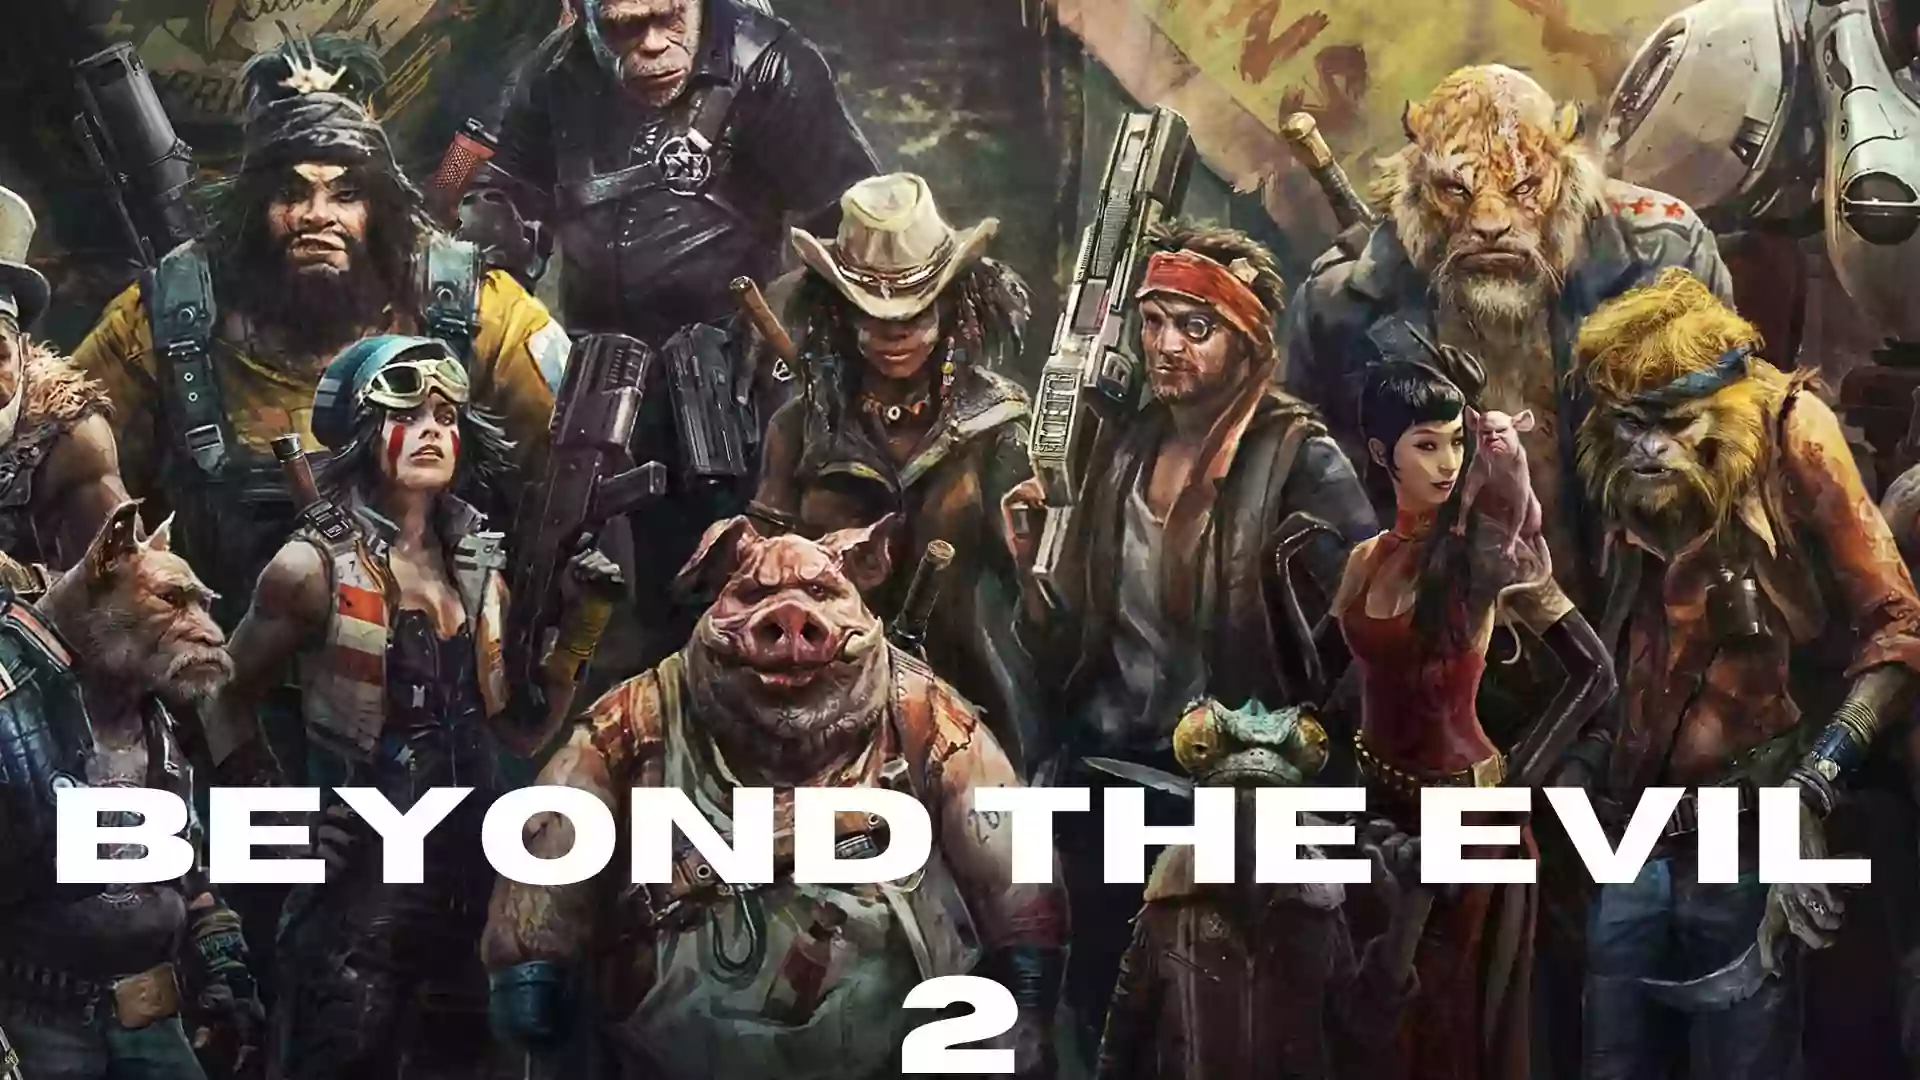 Beyond Good and Evil 2 Parents Guide and age rating